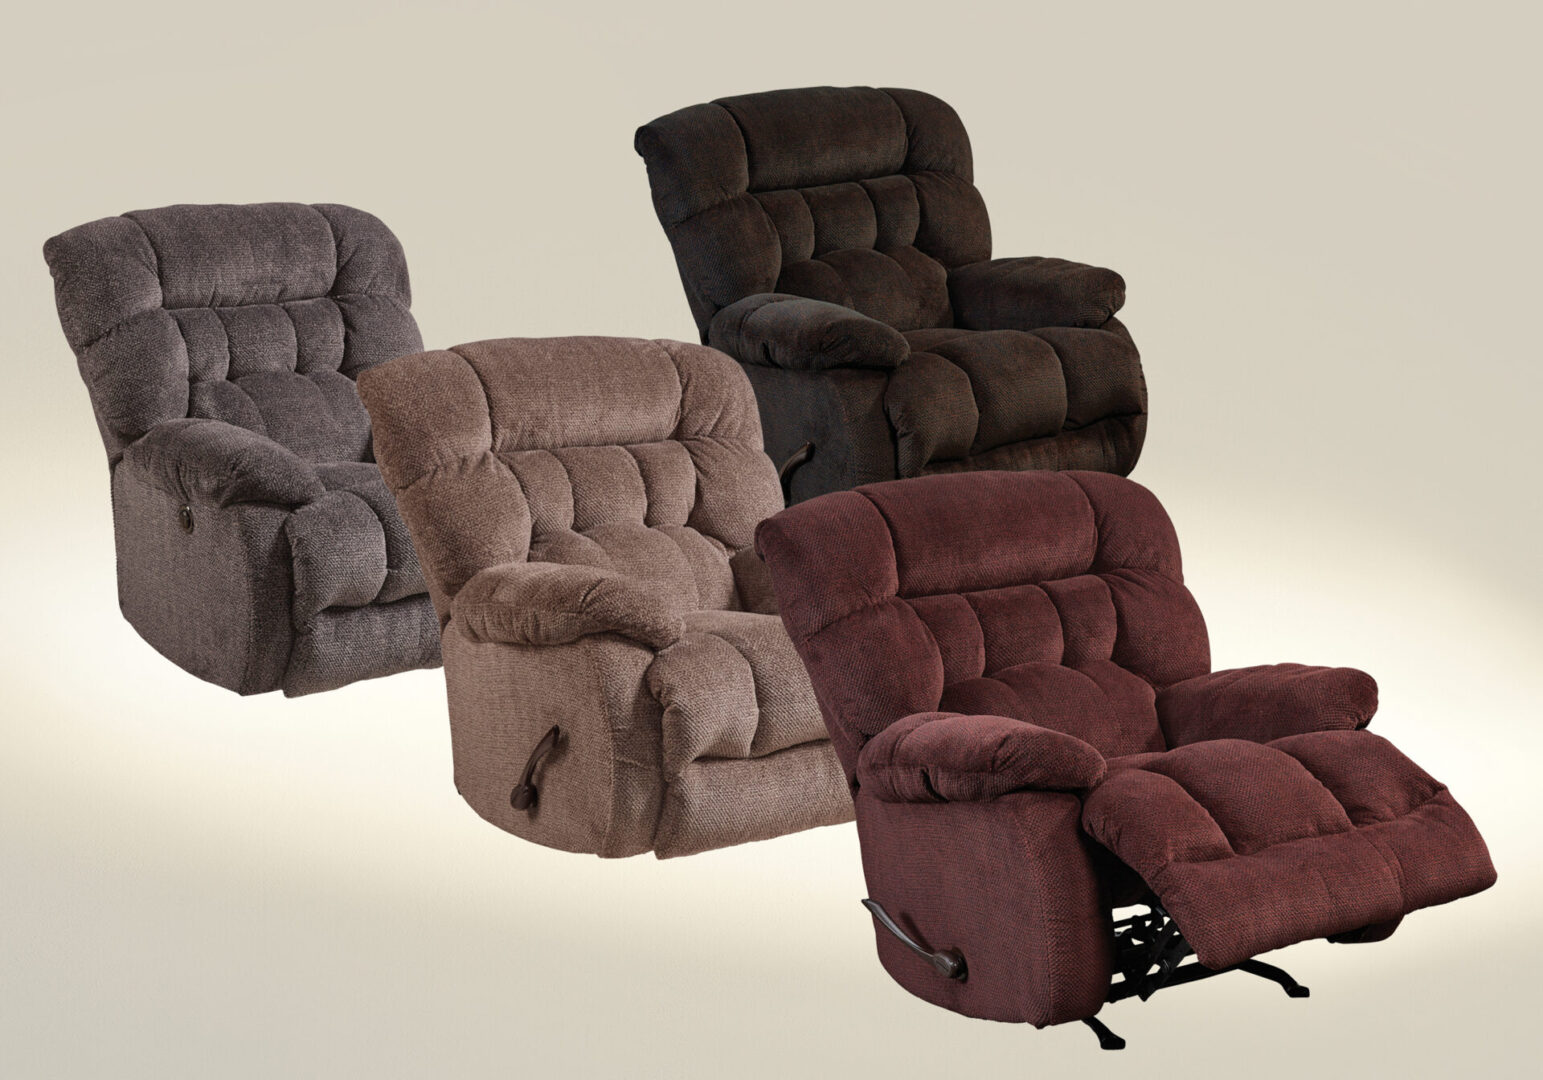 A group of four recliners in different colors.